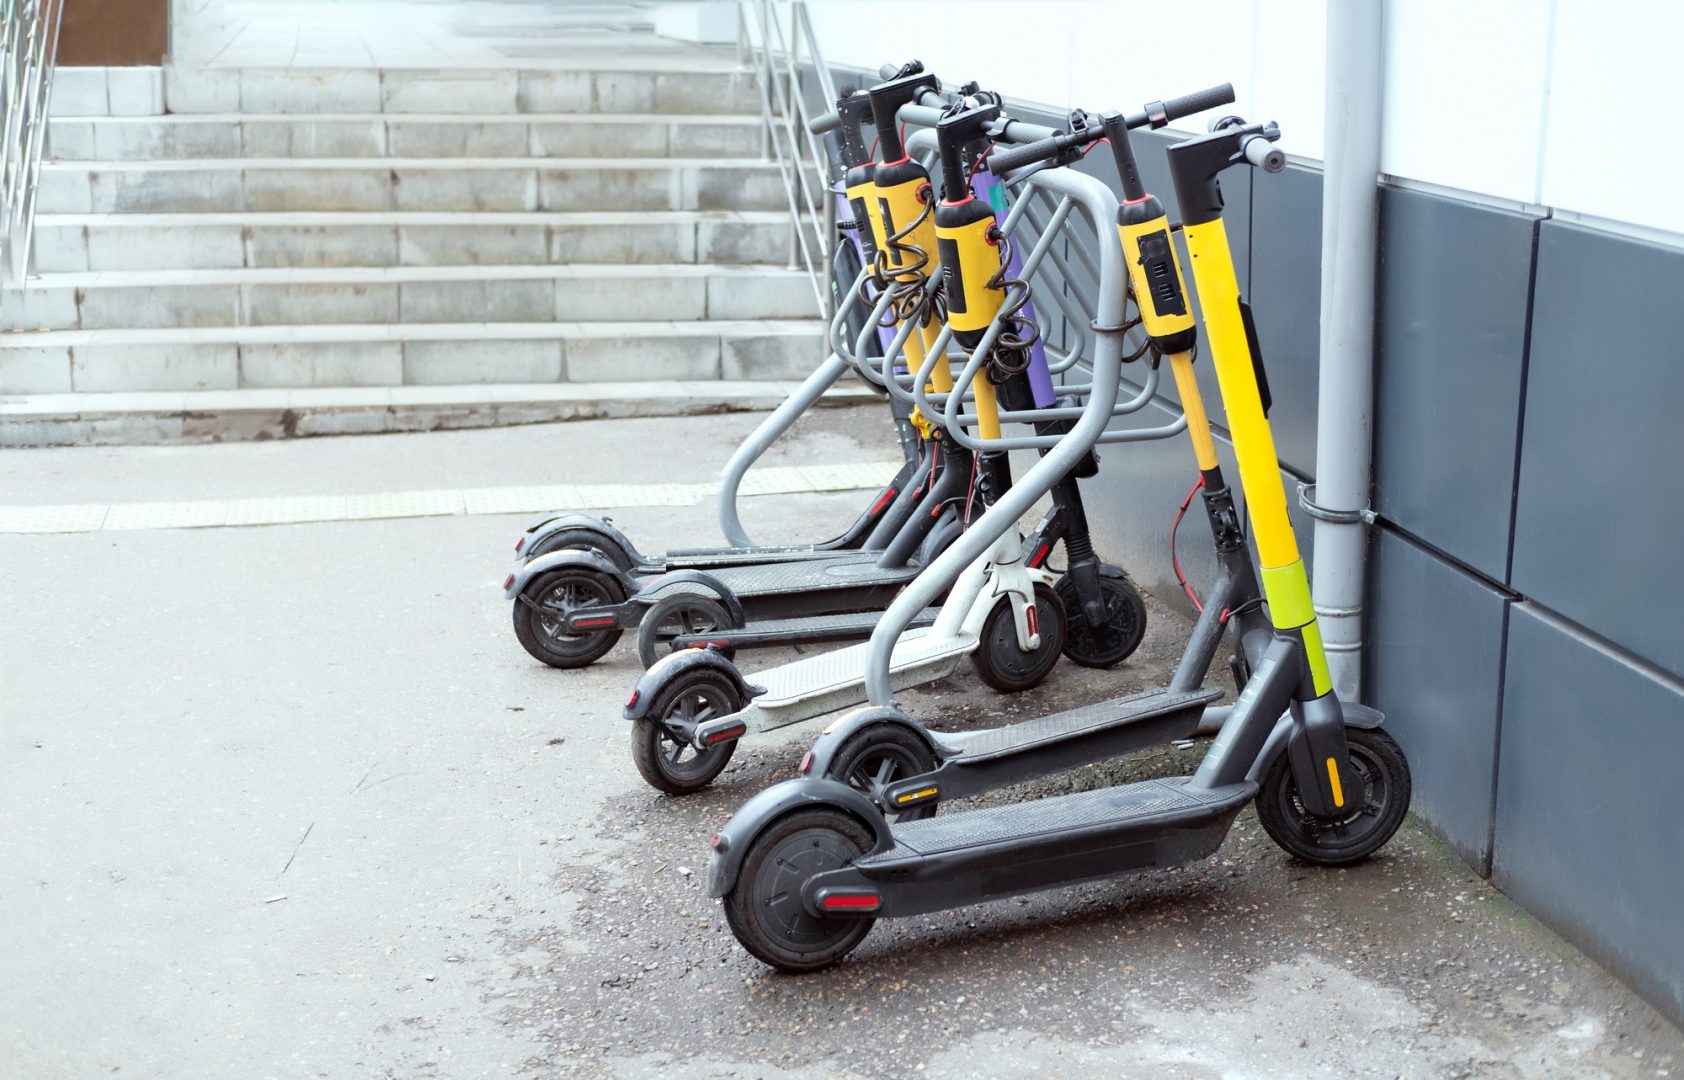 parking for electric scooters yellow scooters on 2023 02 14 02 30 18 utc